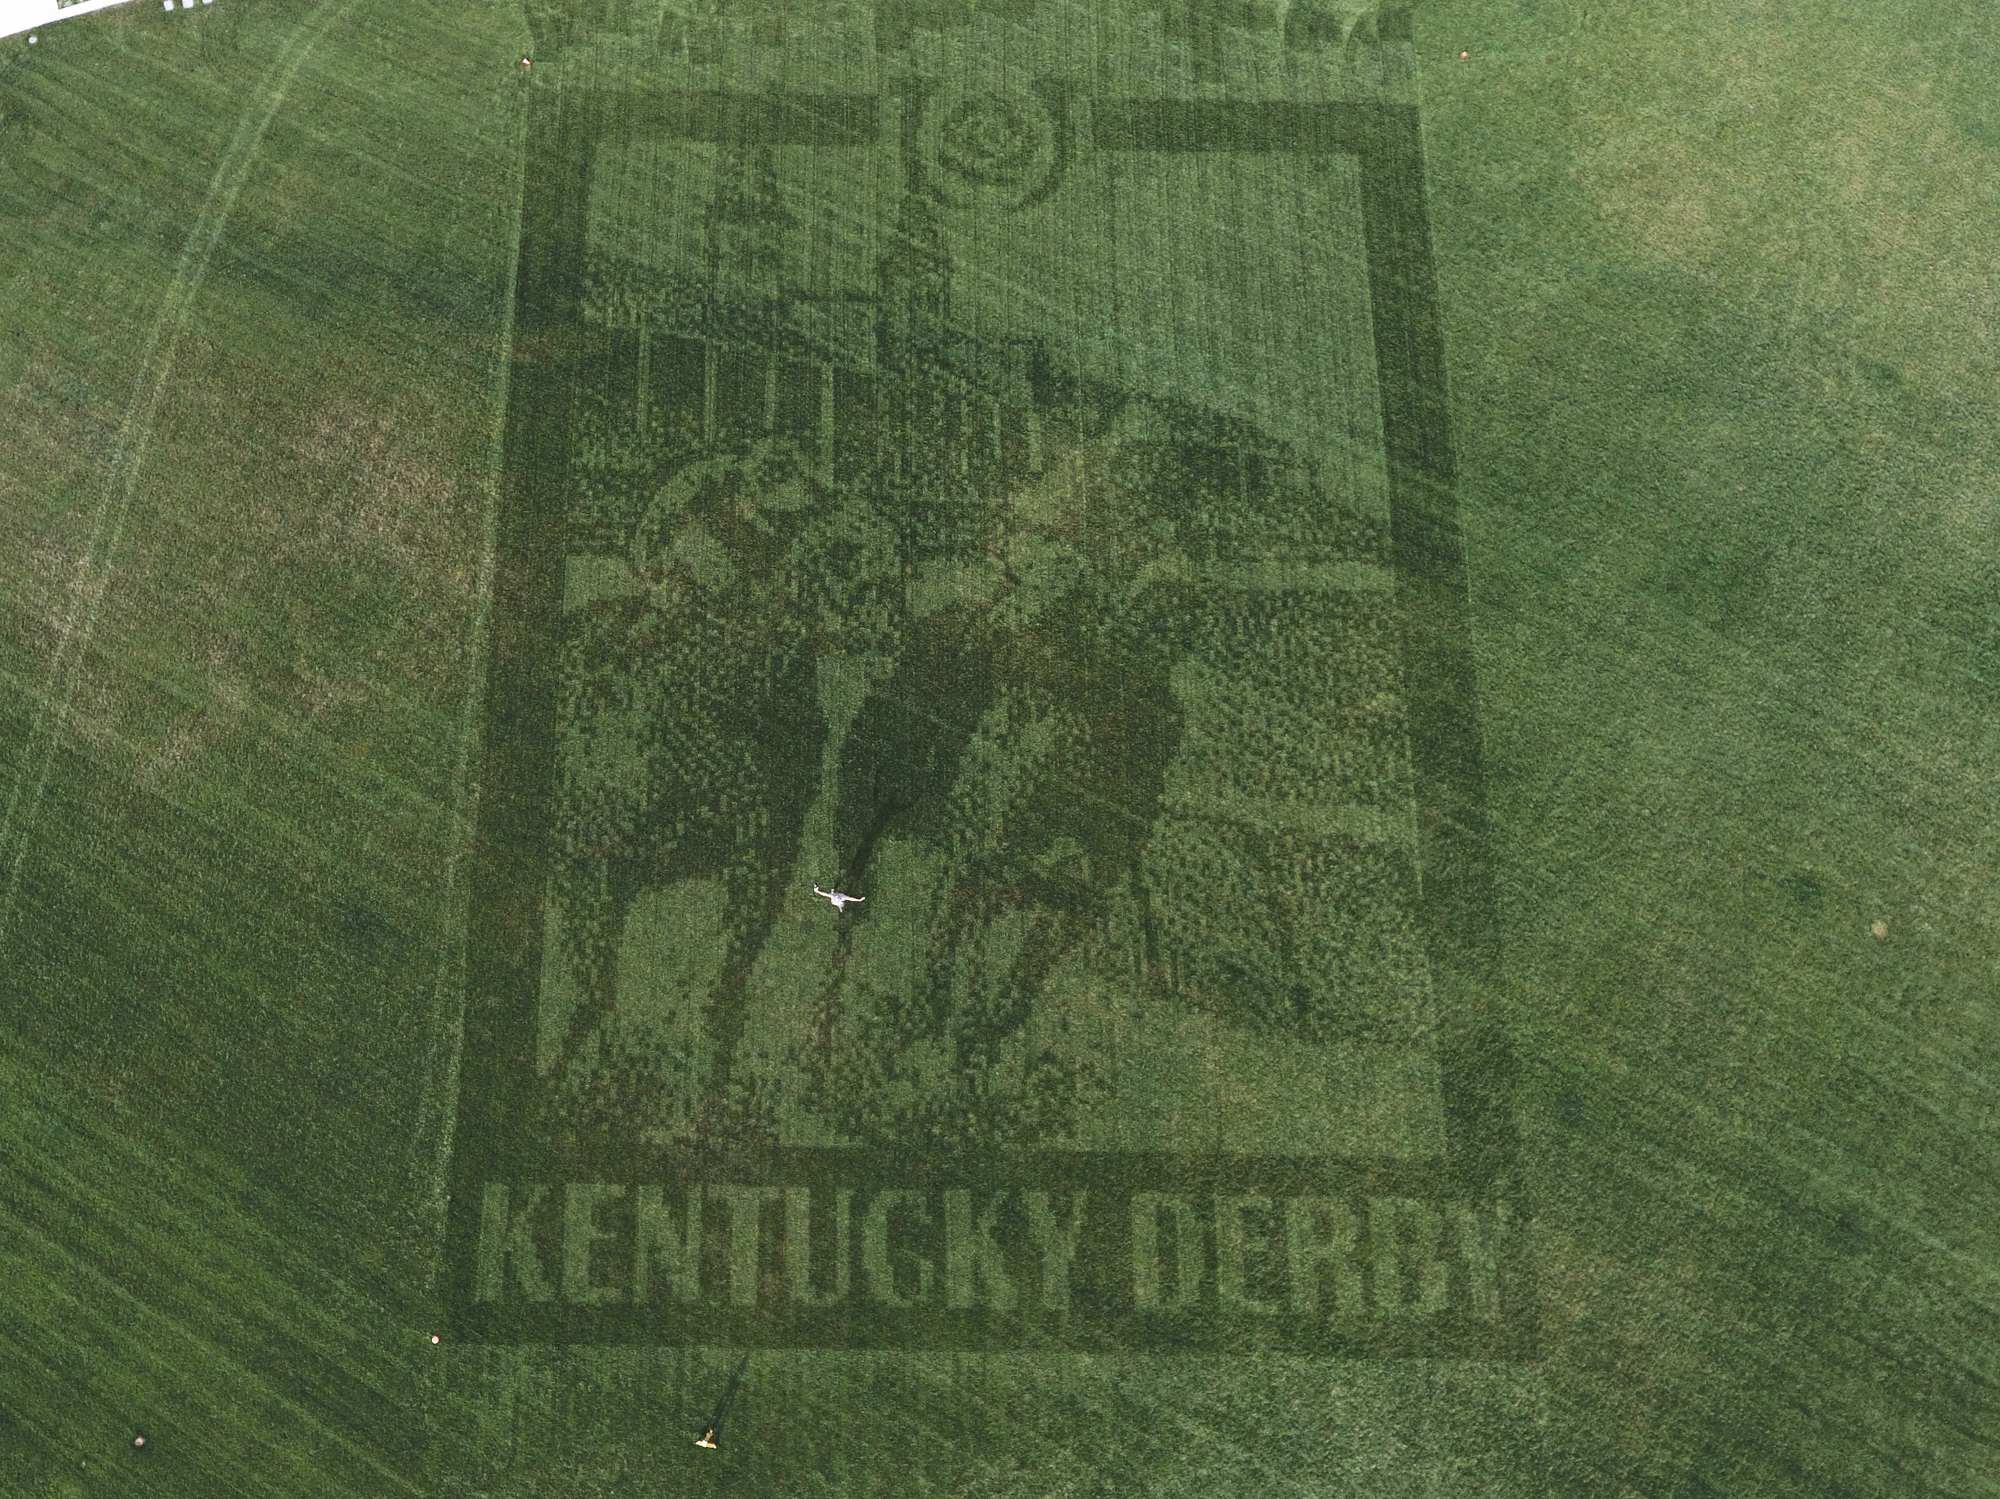 Tribute to the 2016 Kentucky Derby. This image is 150 ft tall.